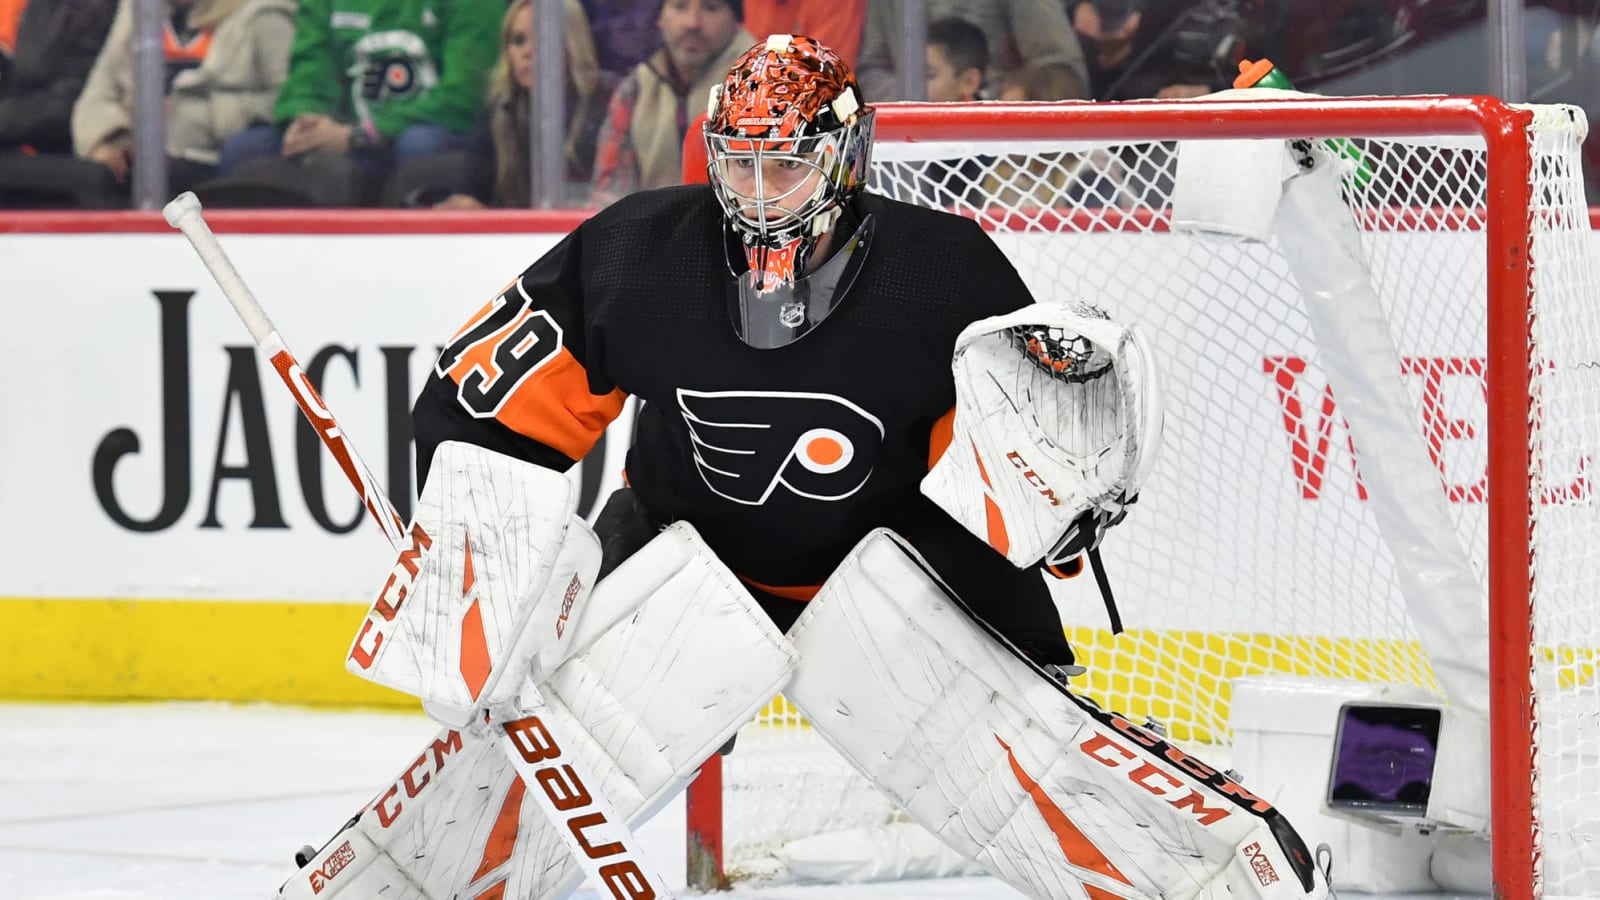 Flyers goalie Carter Hart out for several weeks with abdominal strain